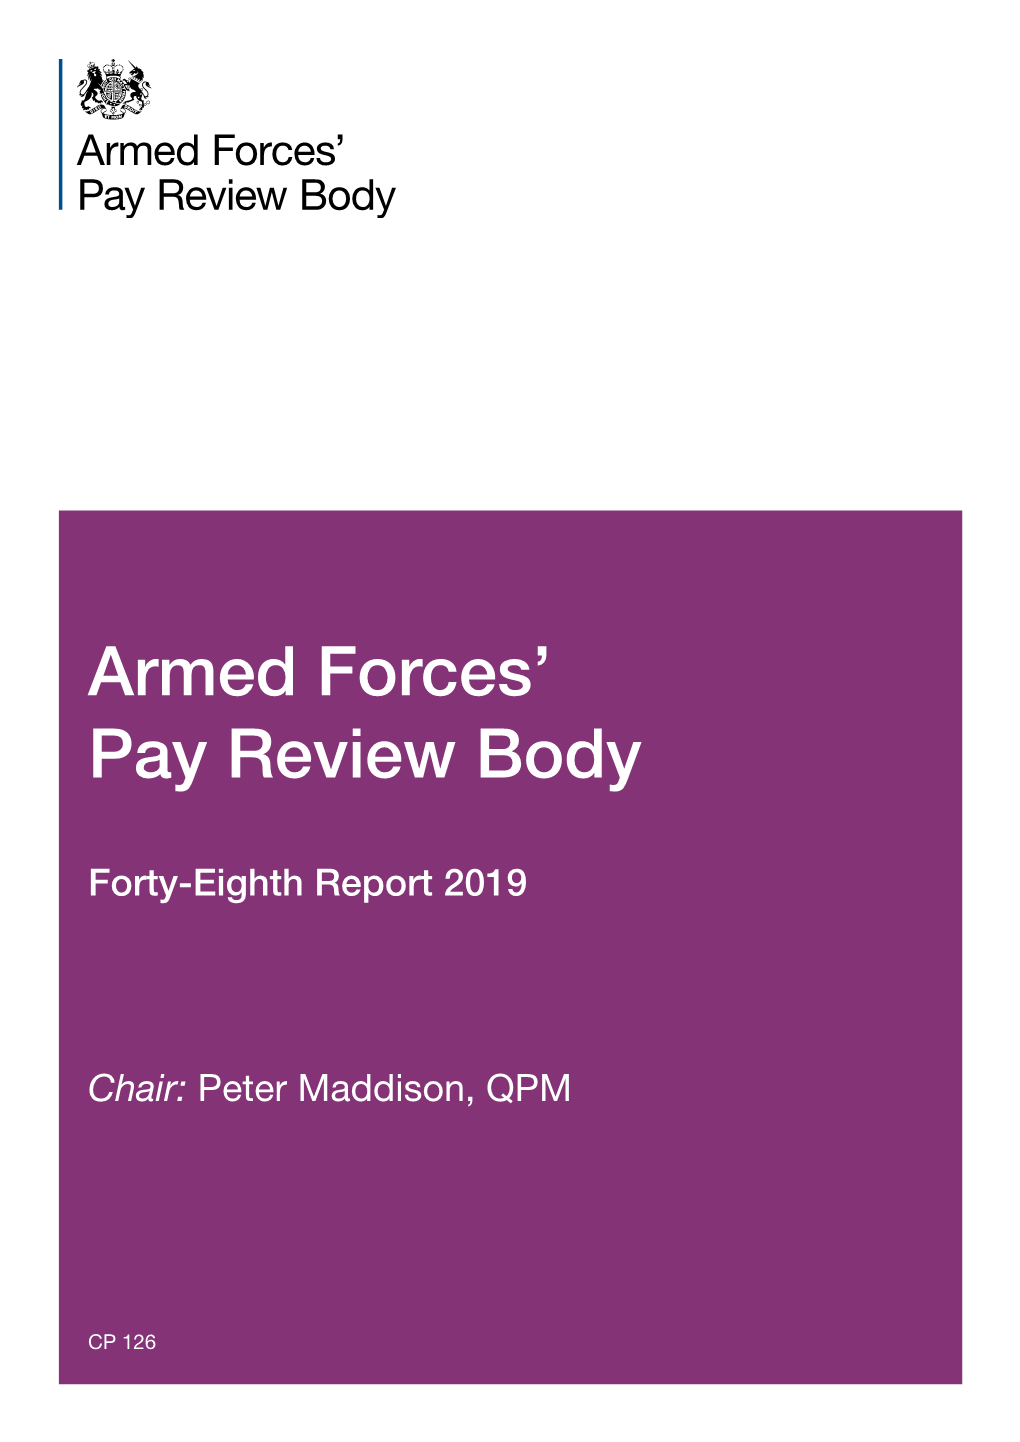 Armed Forces' Pay Review Body – Forty-Eighth Report 2019